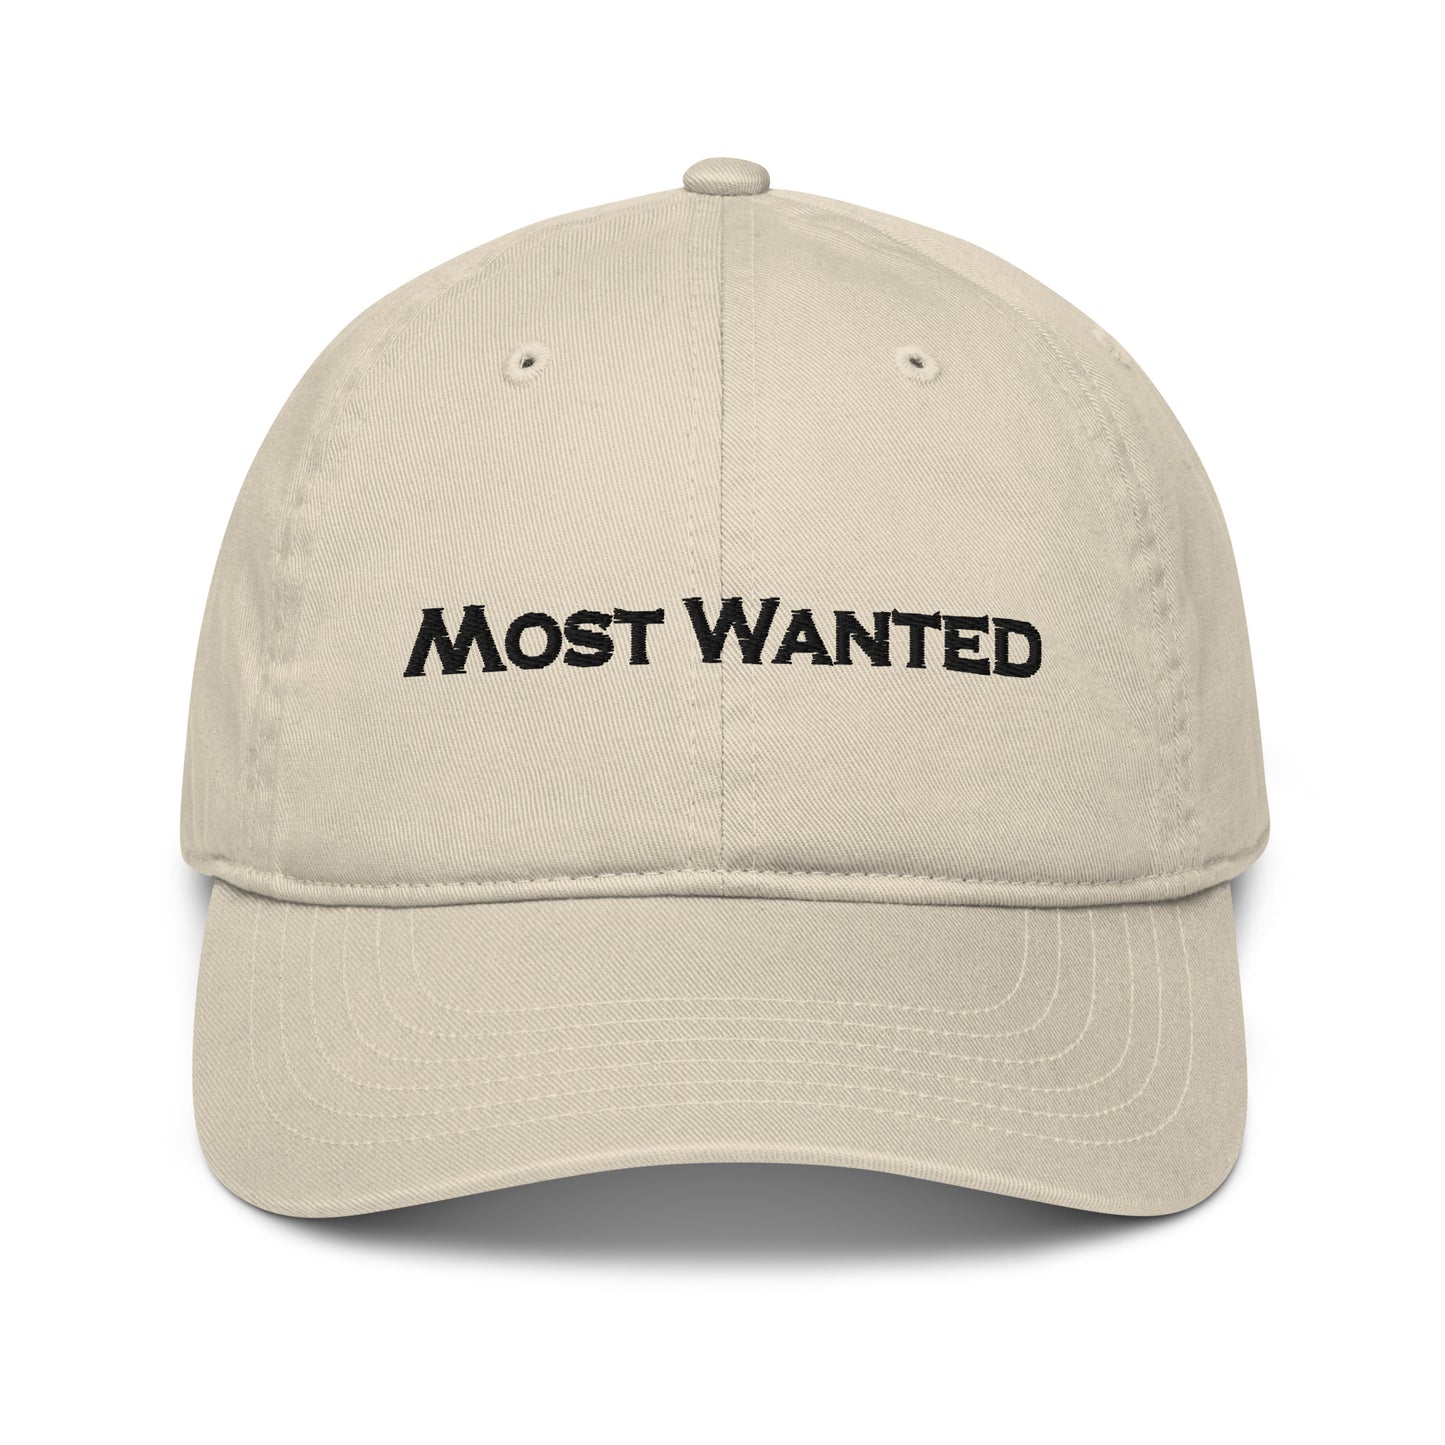 MOST WANTED DAD HAT ⭐⭐⚫⭐⭐